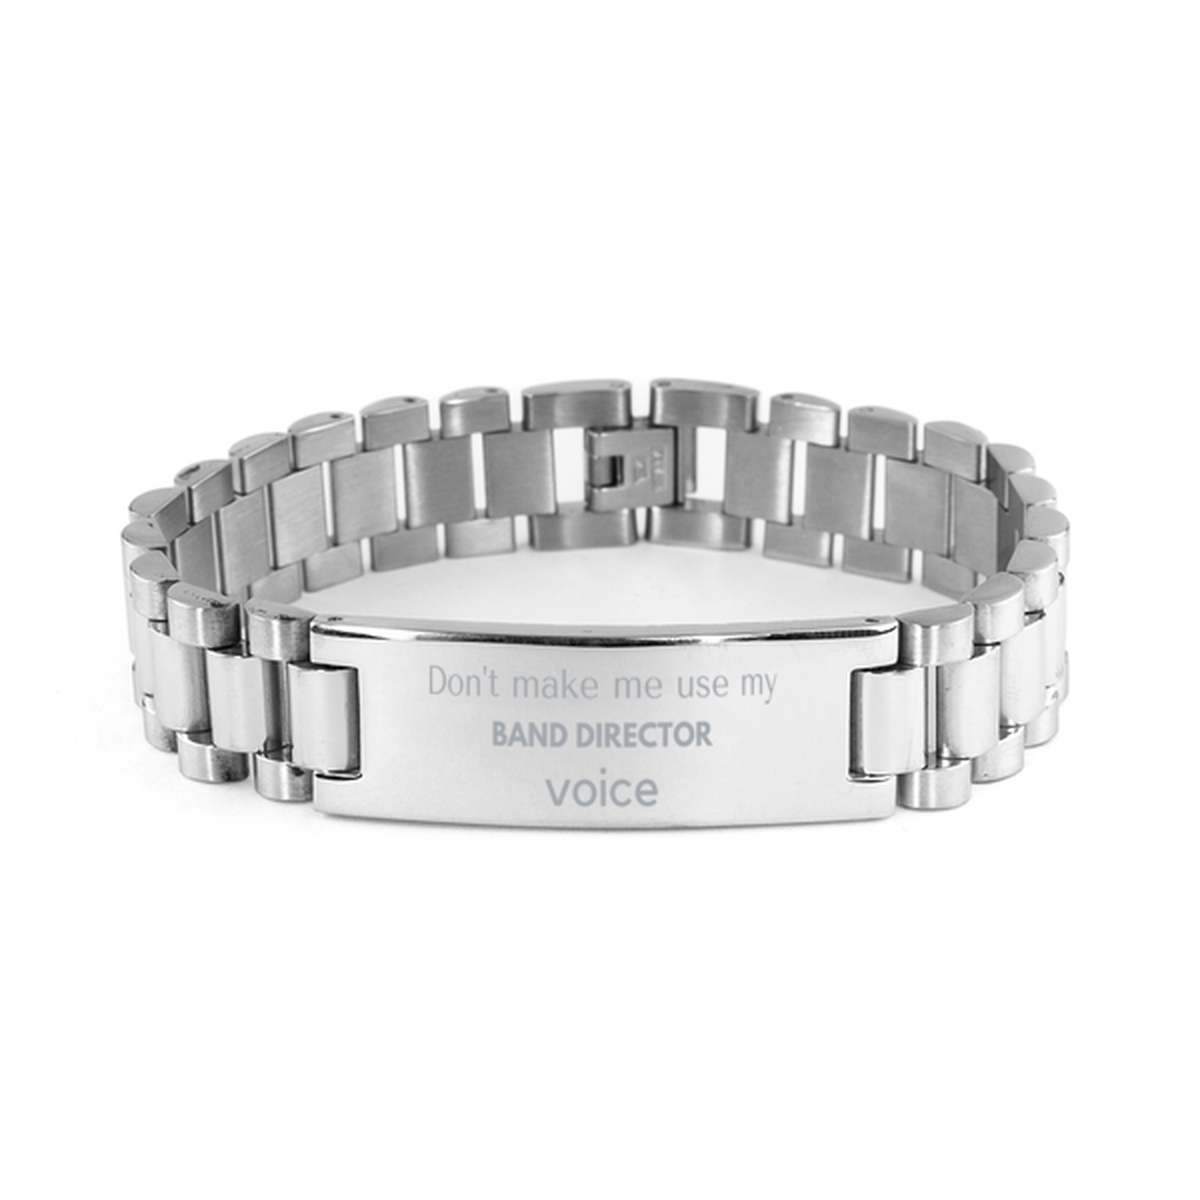 Don't make me use my Band Director voice, Sarcasm Band Director Gifts, Christmas Band Director Ladder Stainless Steel Bracelet Birthday Unique Gifts For Band Director Coworkers, Men, Women, Colleague, Friends